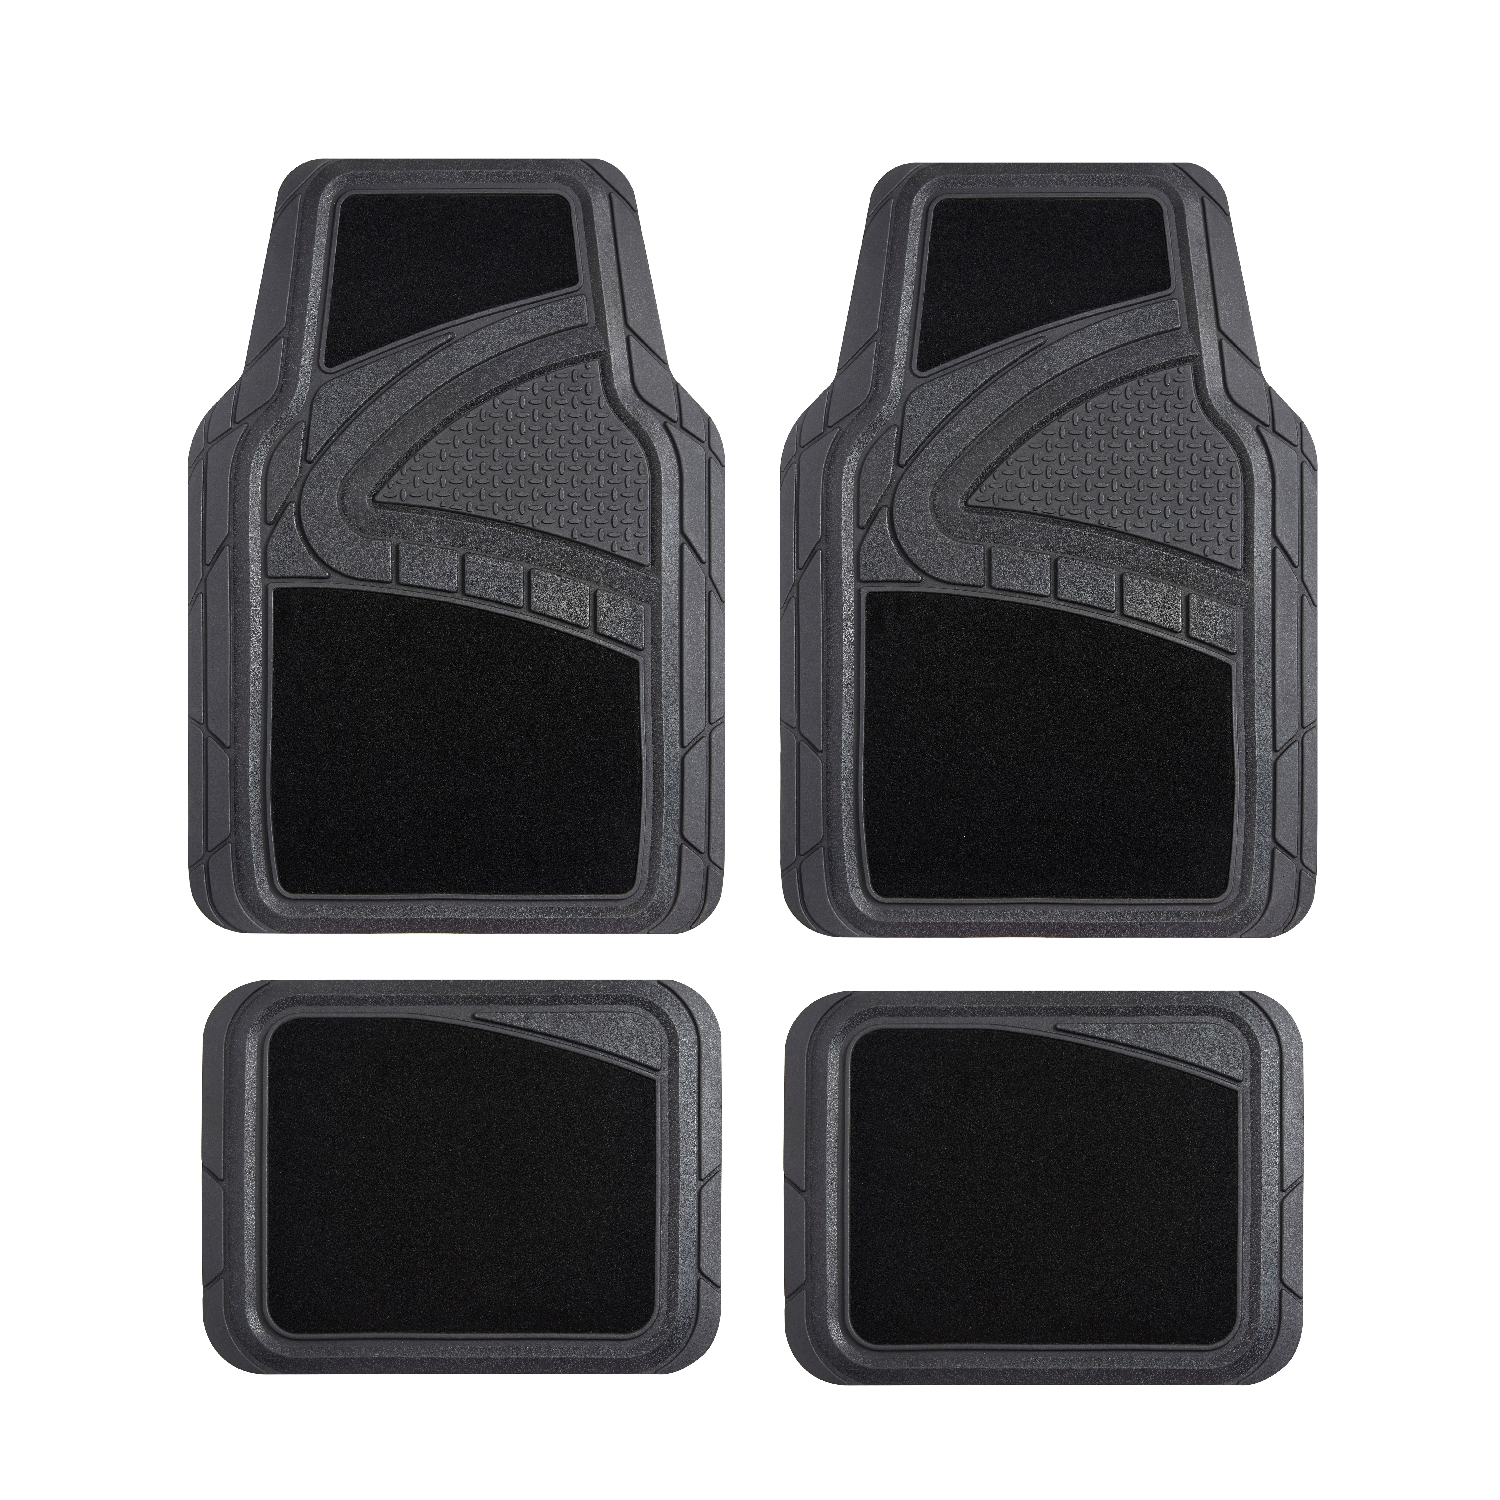 Stay Safe and Clean with High-Quality Car Mats